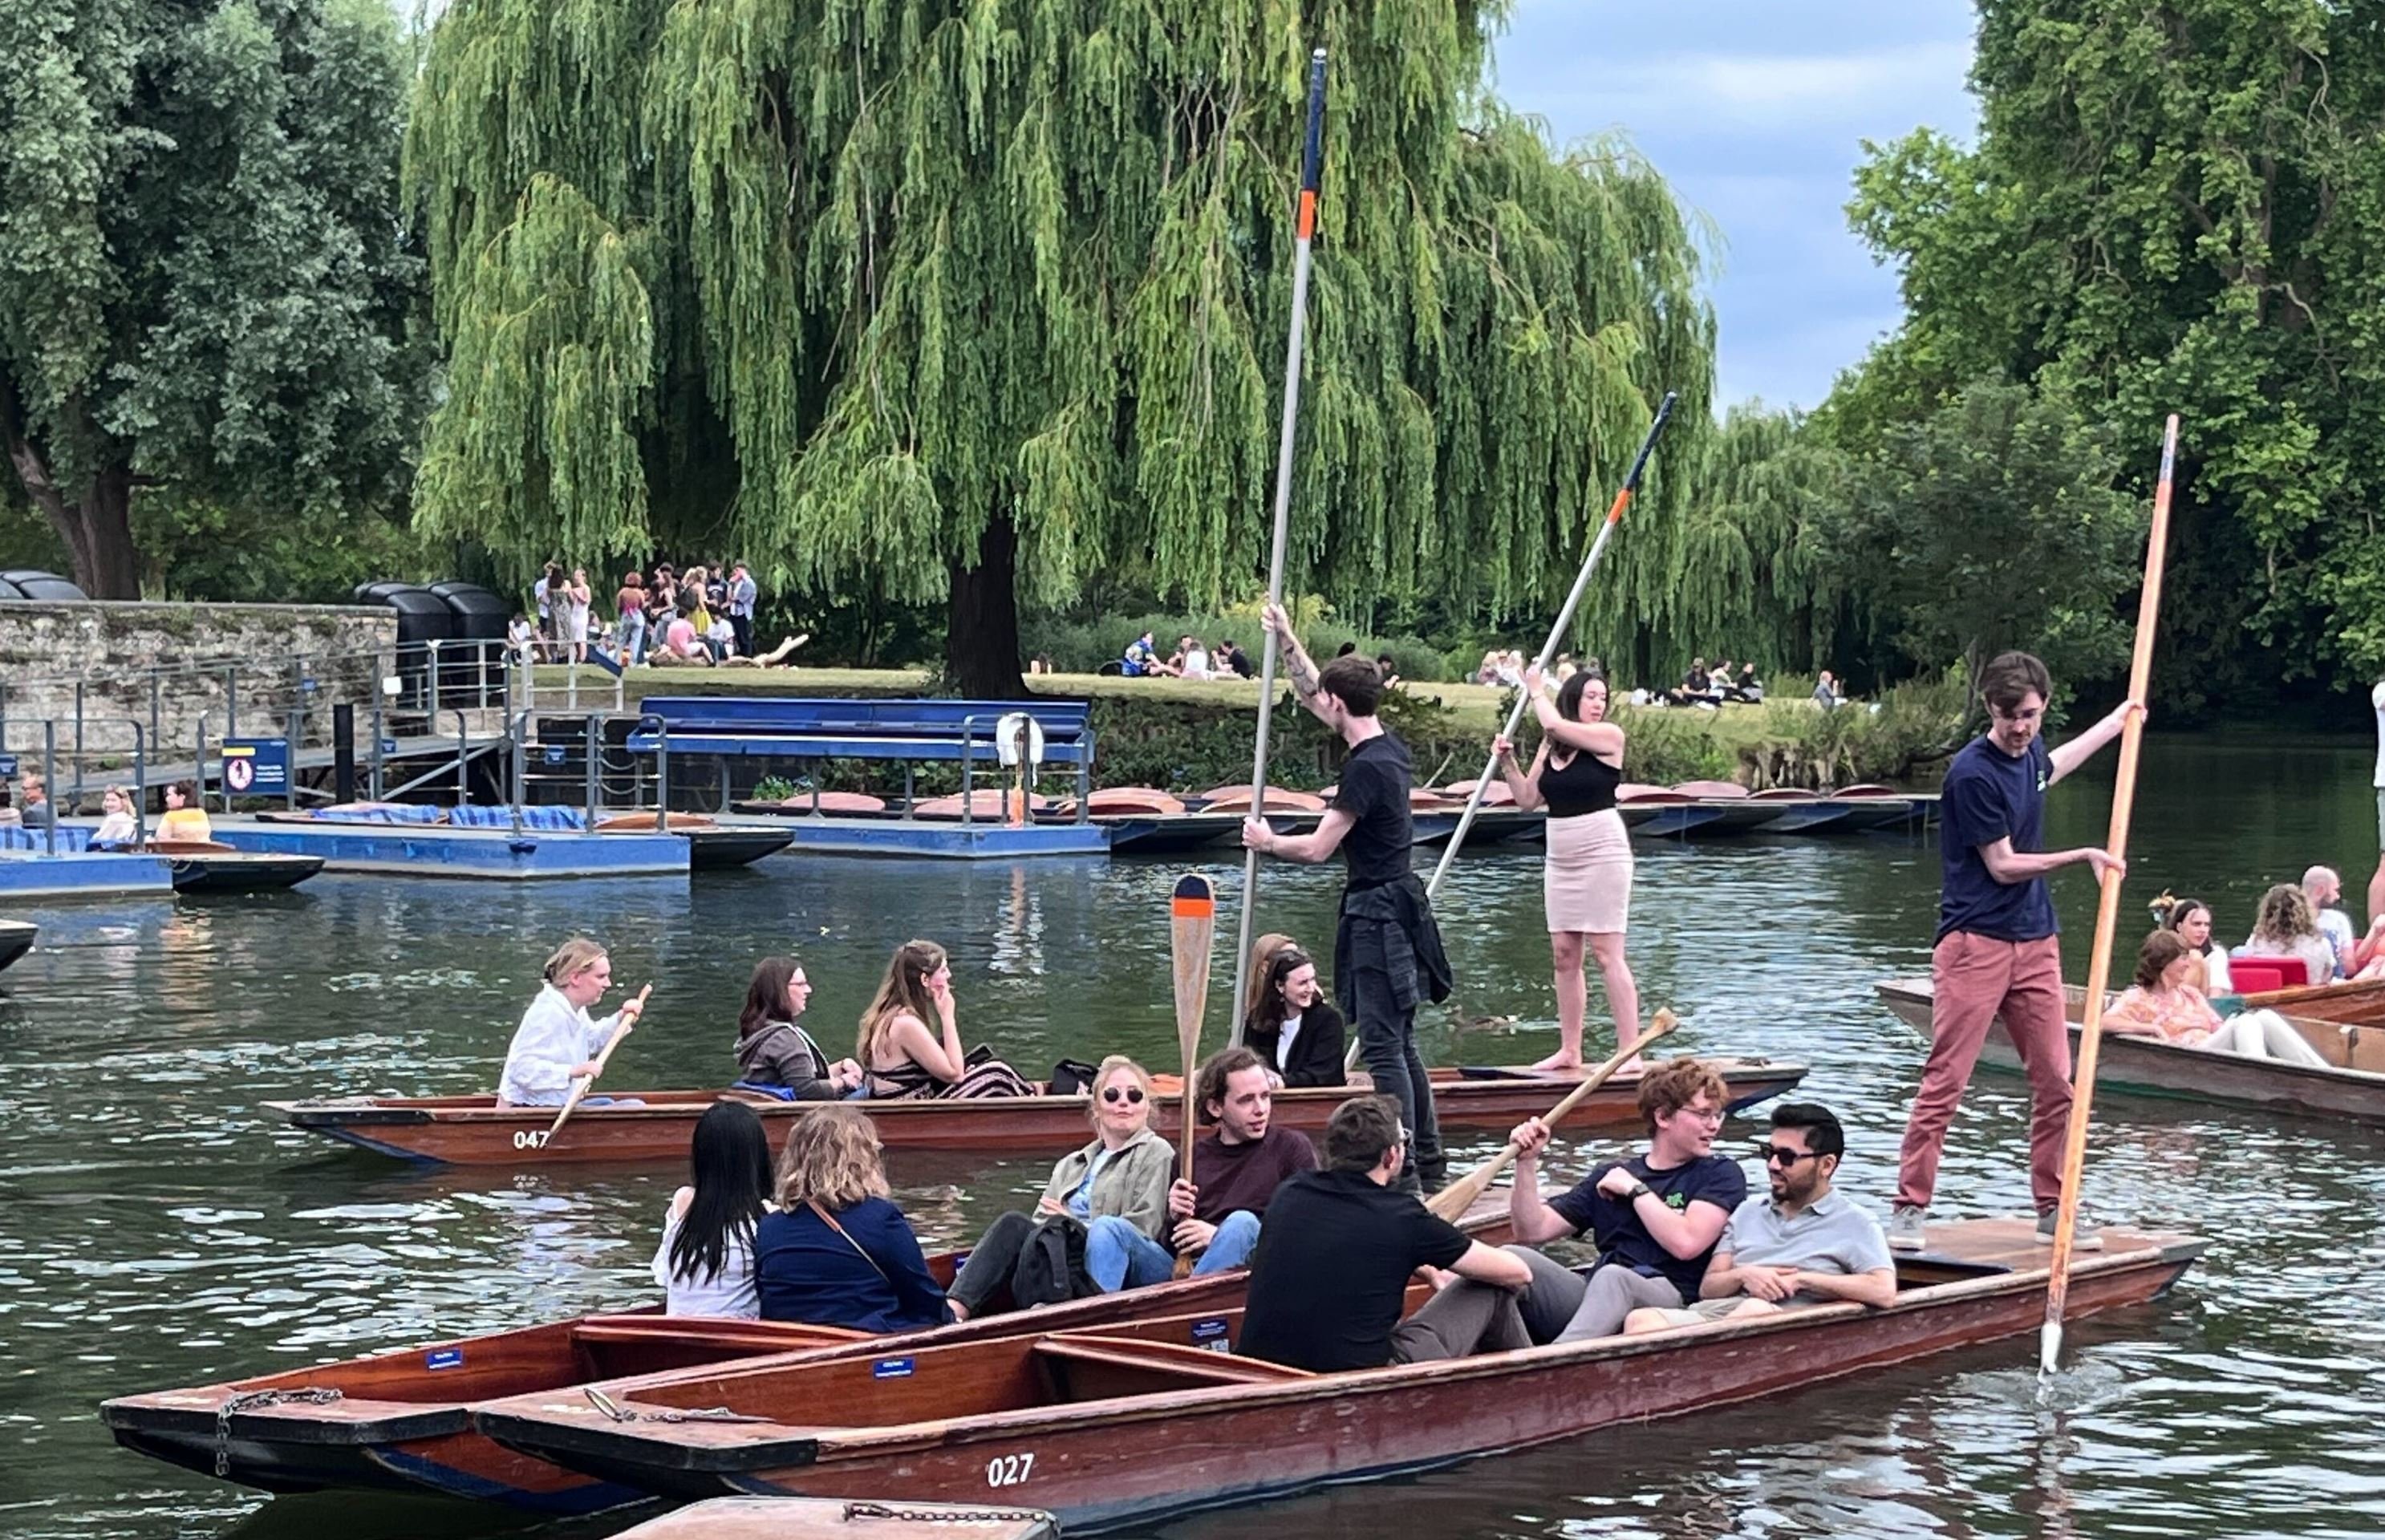 Our UK team punting on the River Cam.